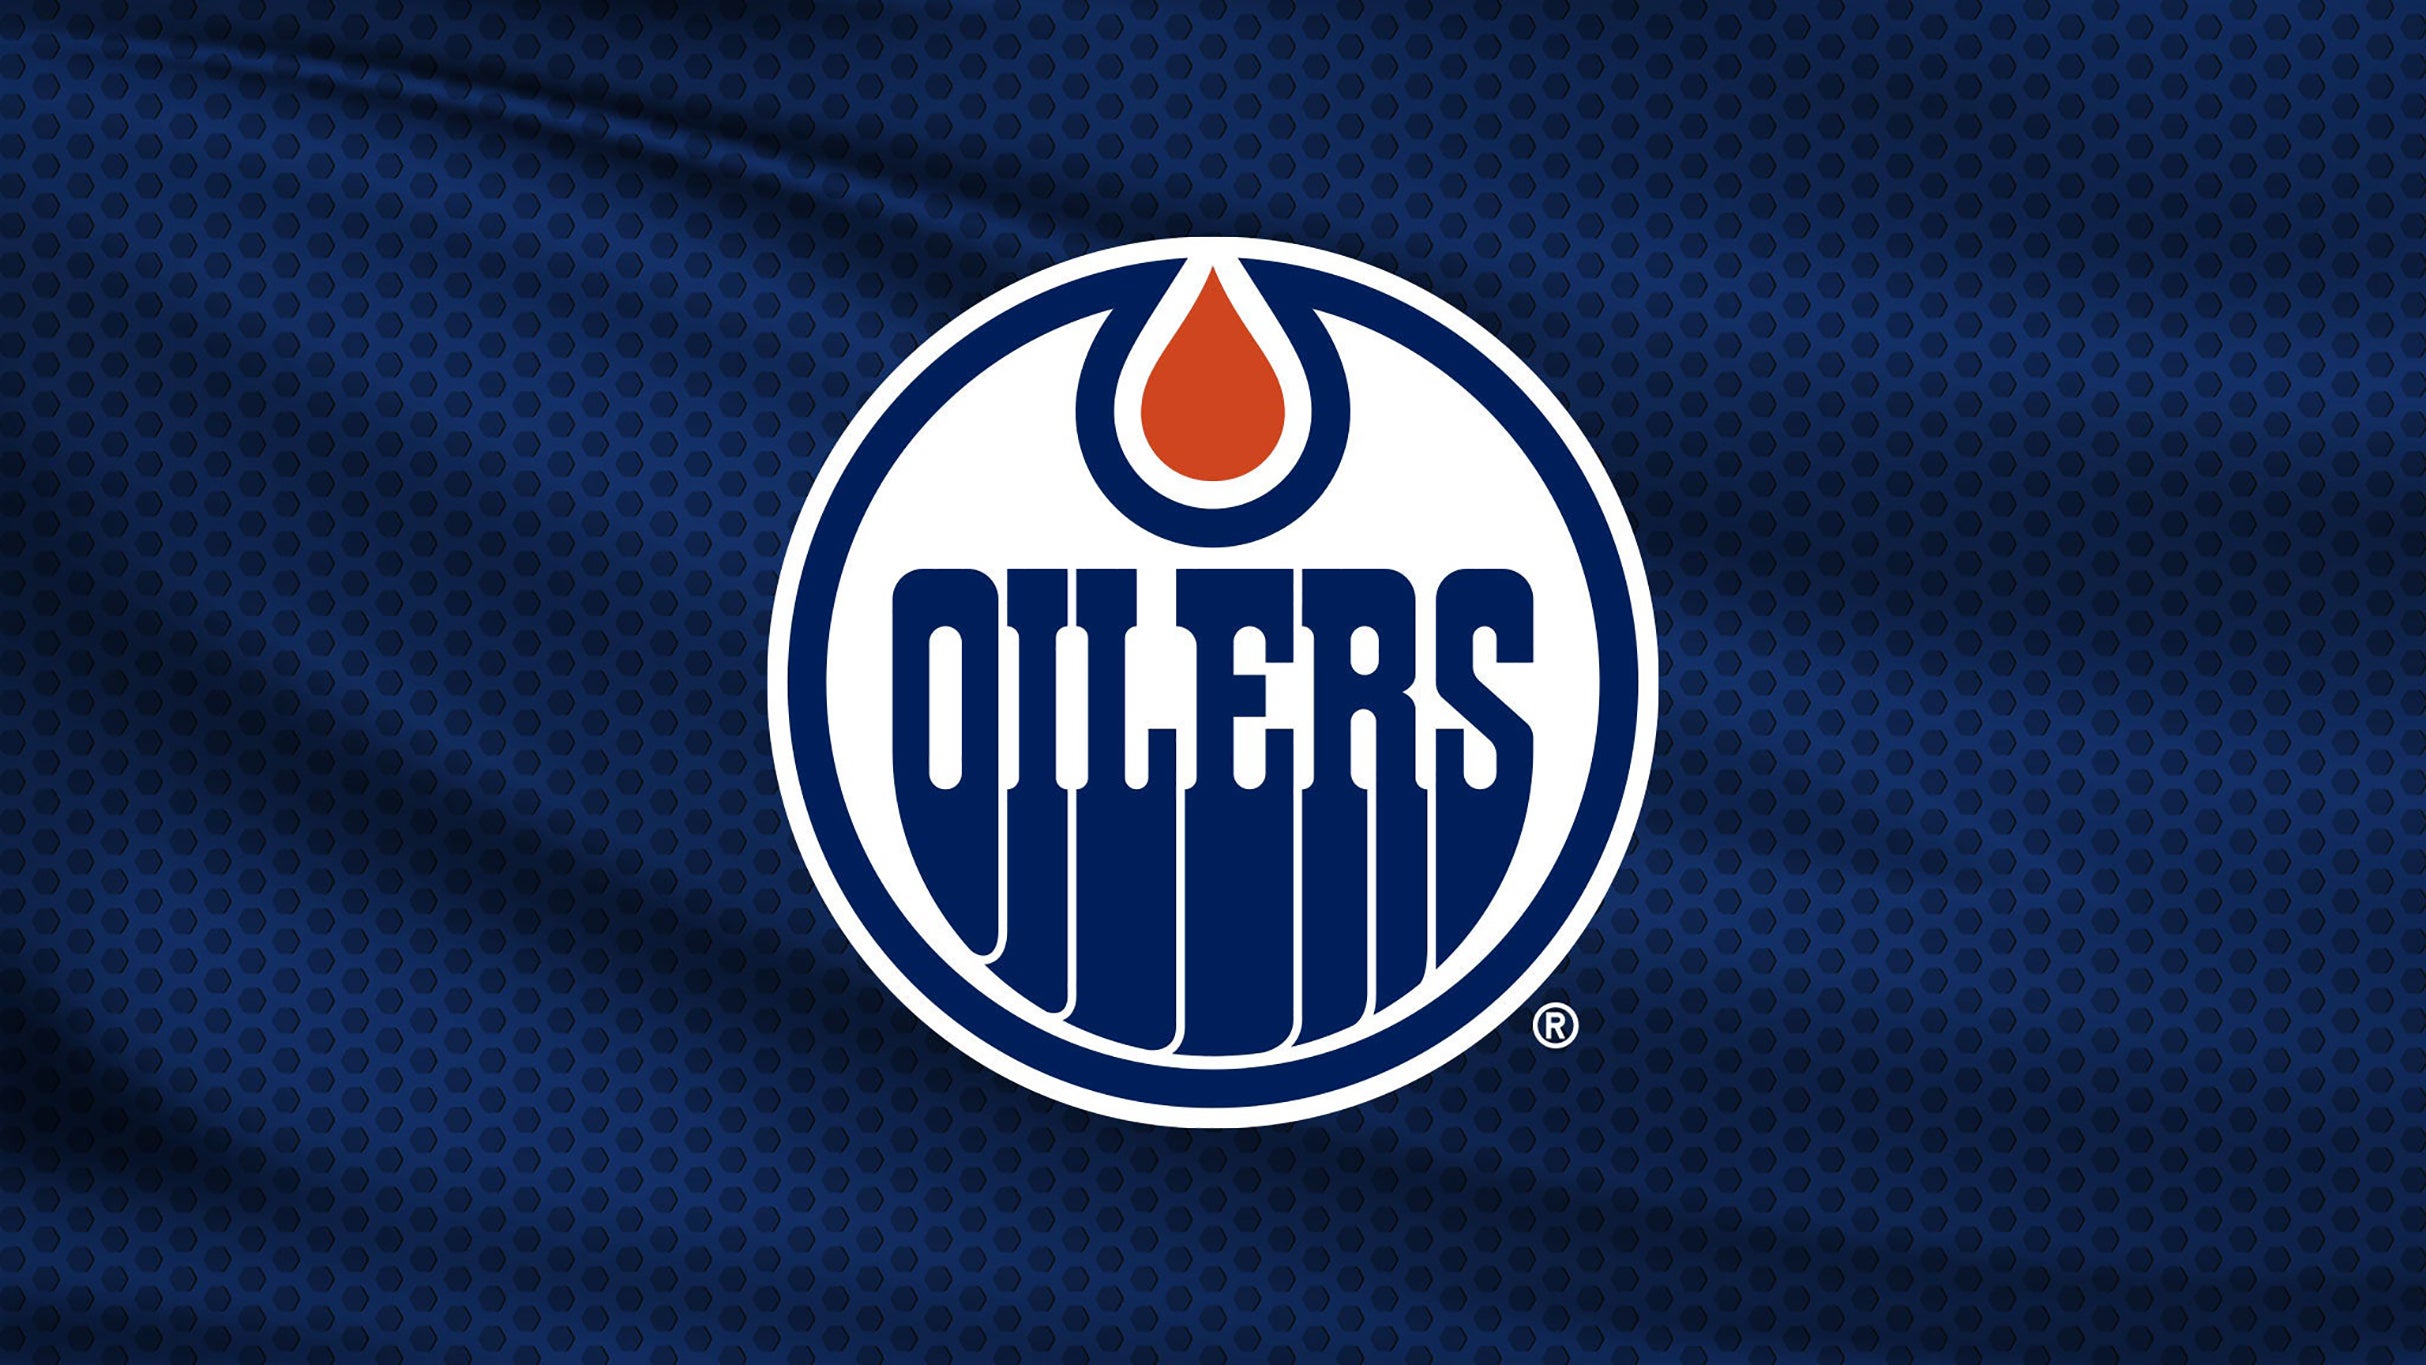 NHL Playoffs Round 2 Home Game 4: Oilers v. TBD in Edmonton promo photo for Exclusive presale offer code